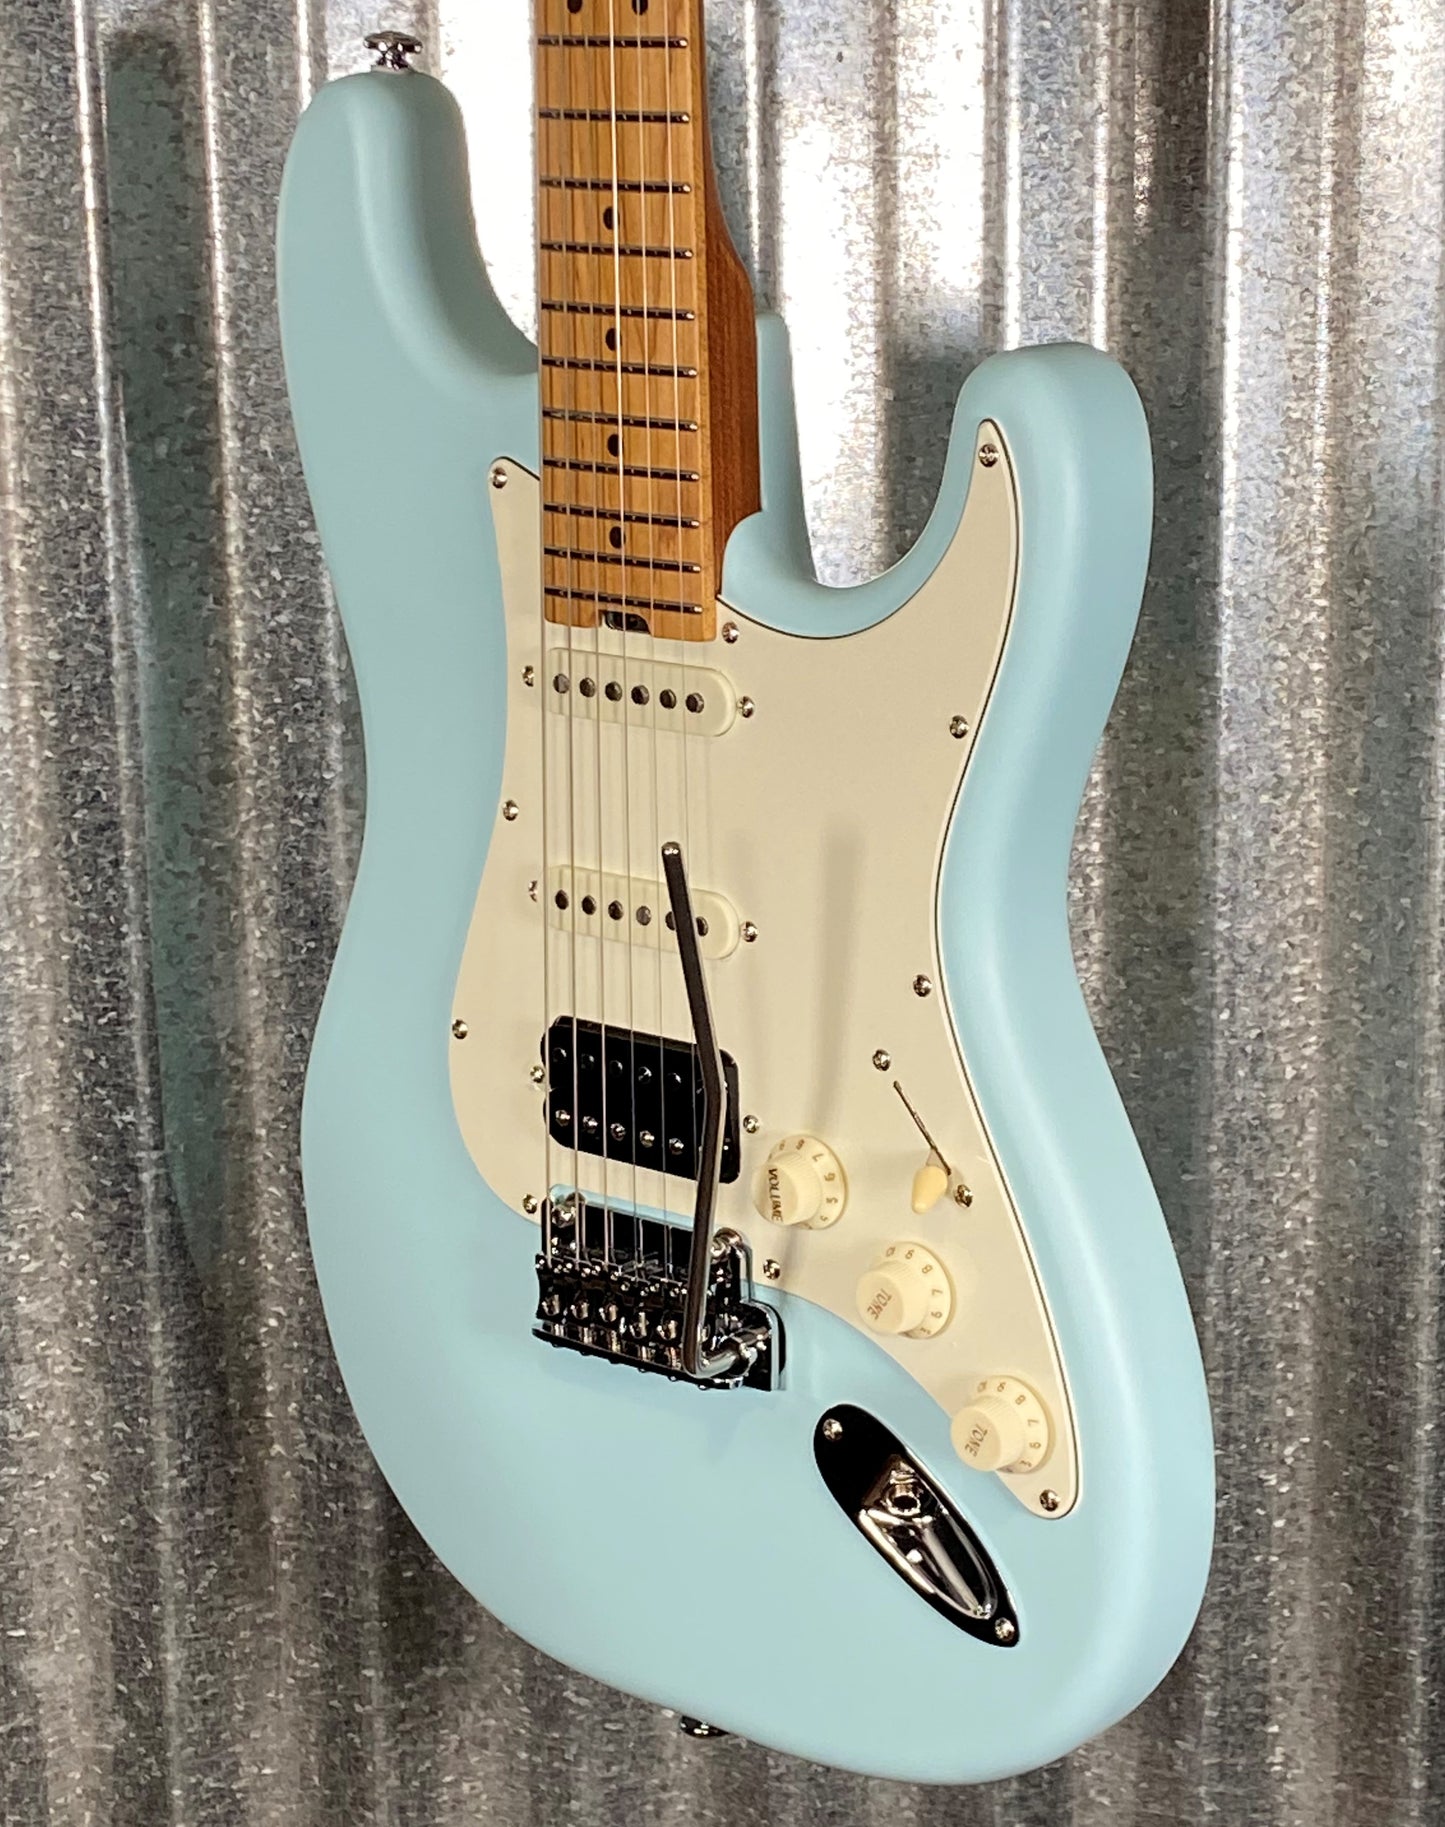 Musi Capricorn Classic HSS Stratocaster Matte Baby Blue Guitar #5081 Used